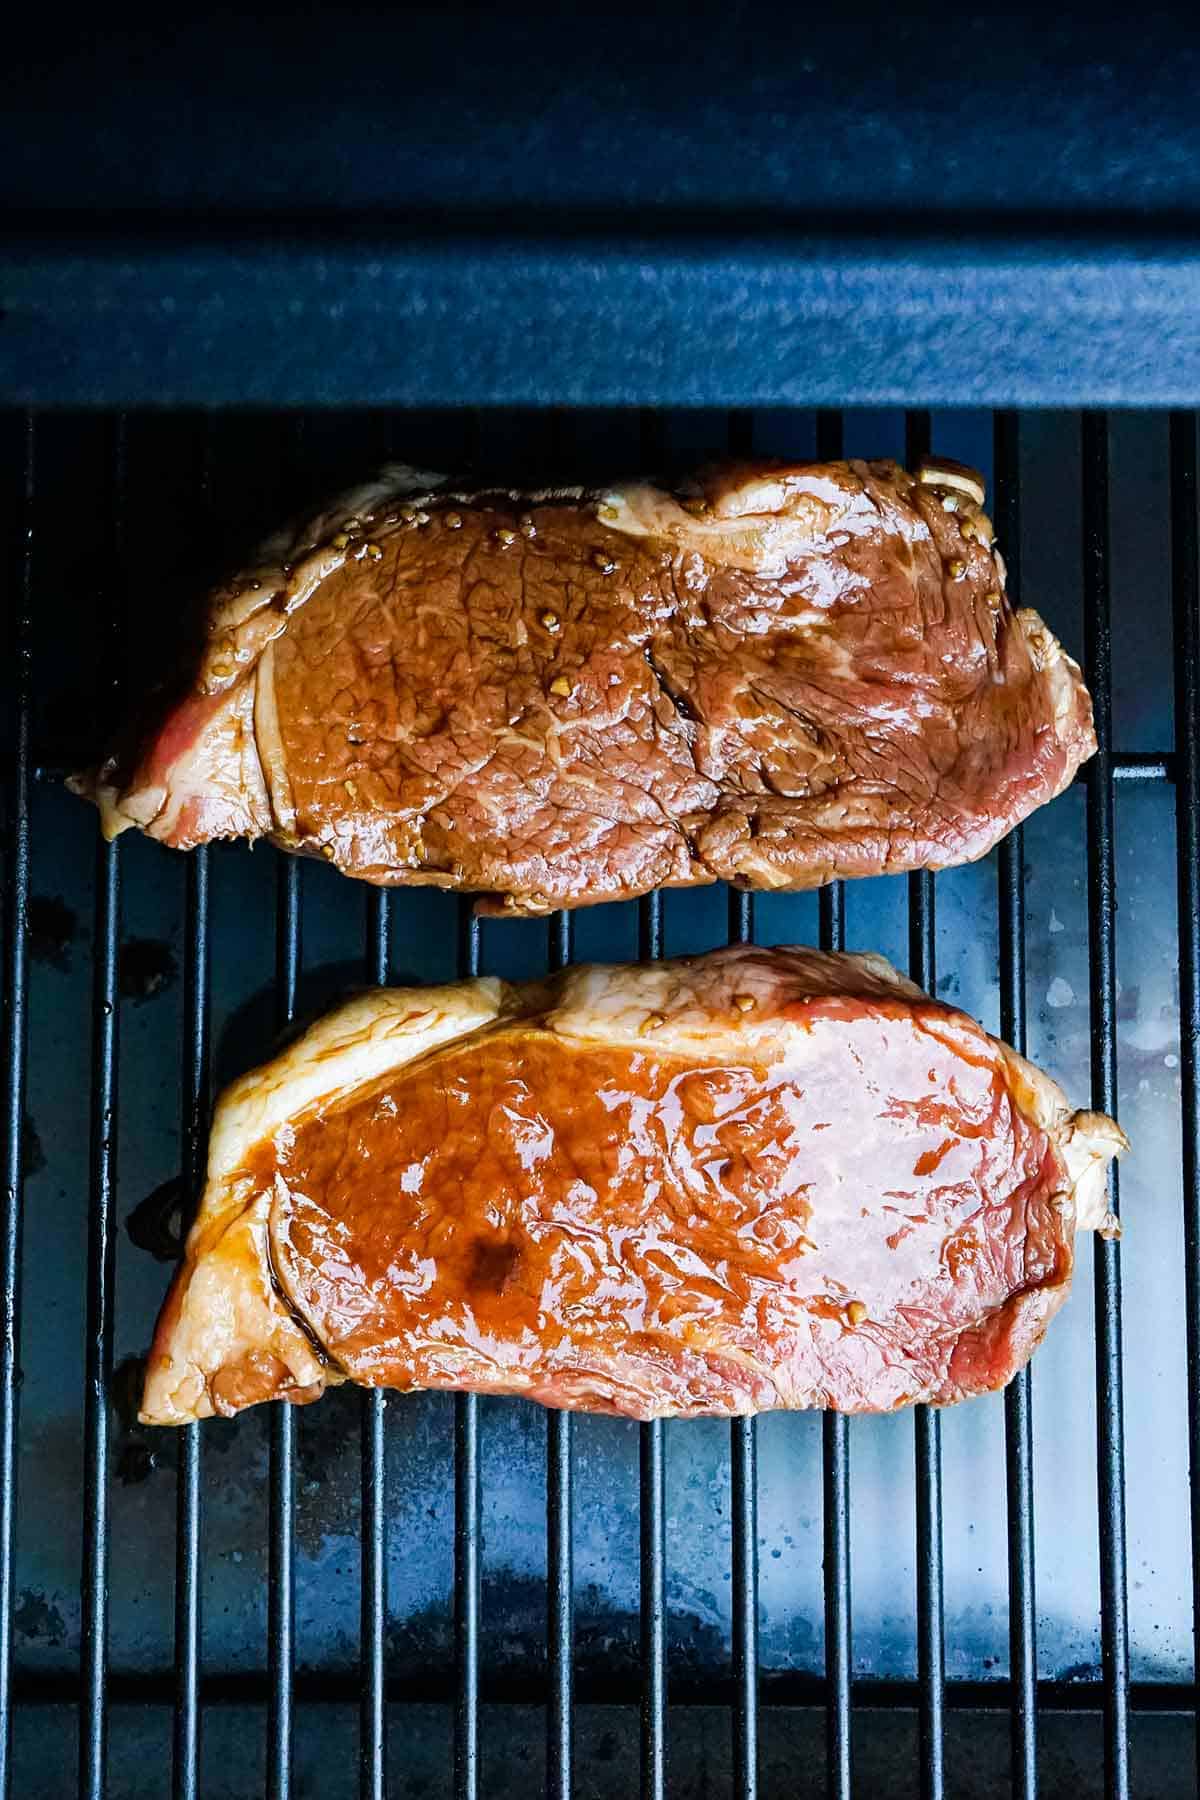 Strip steaks on the grill